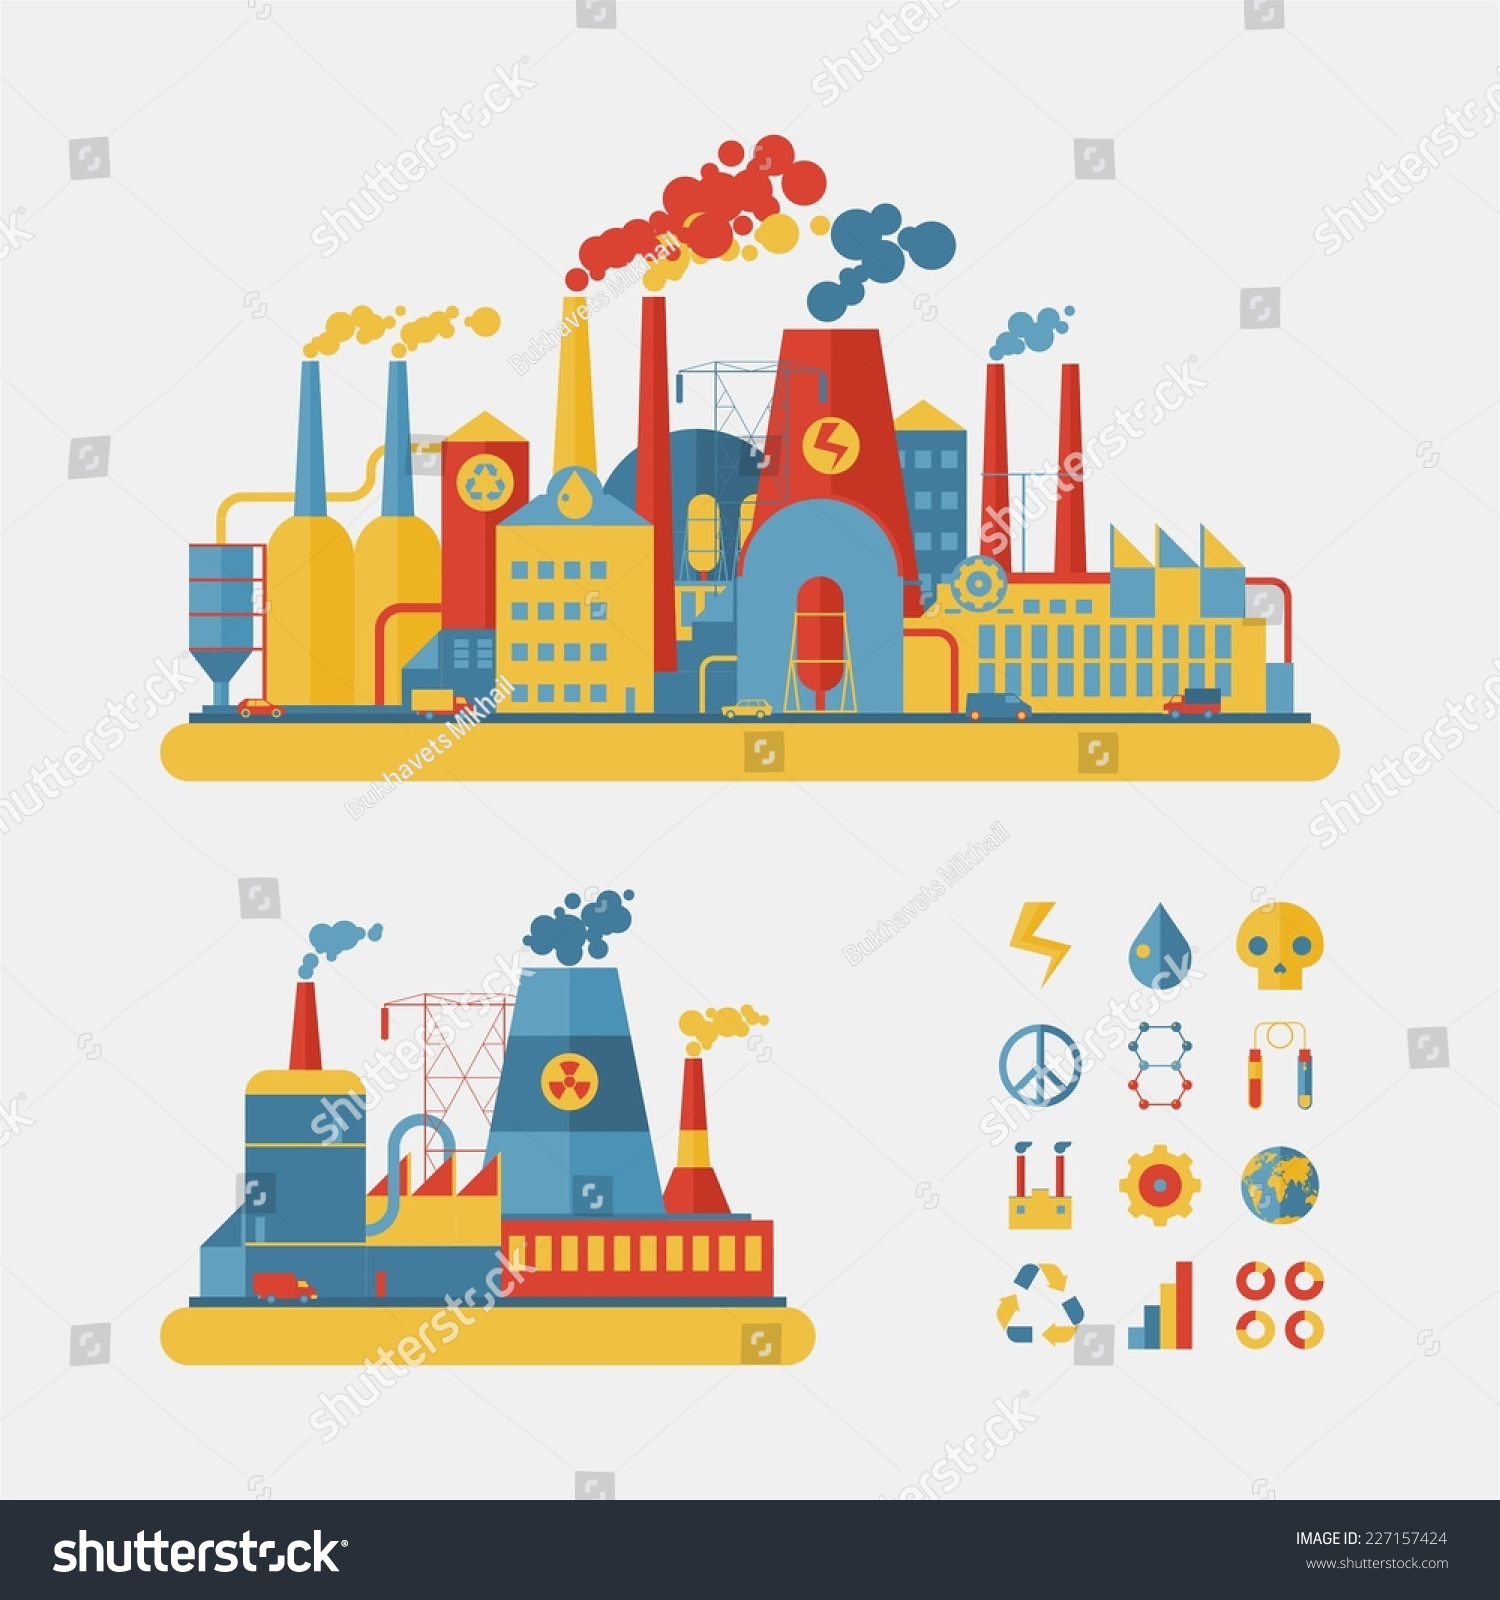 clipart of industry - photo #31